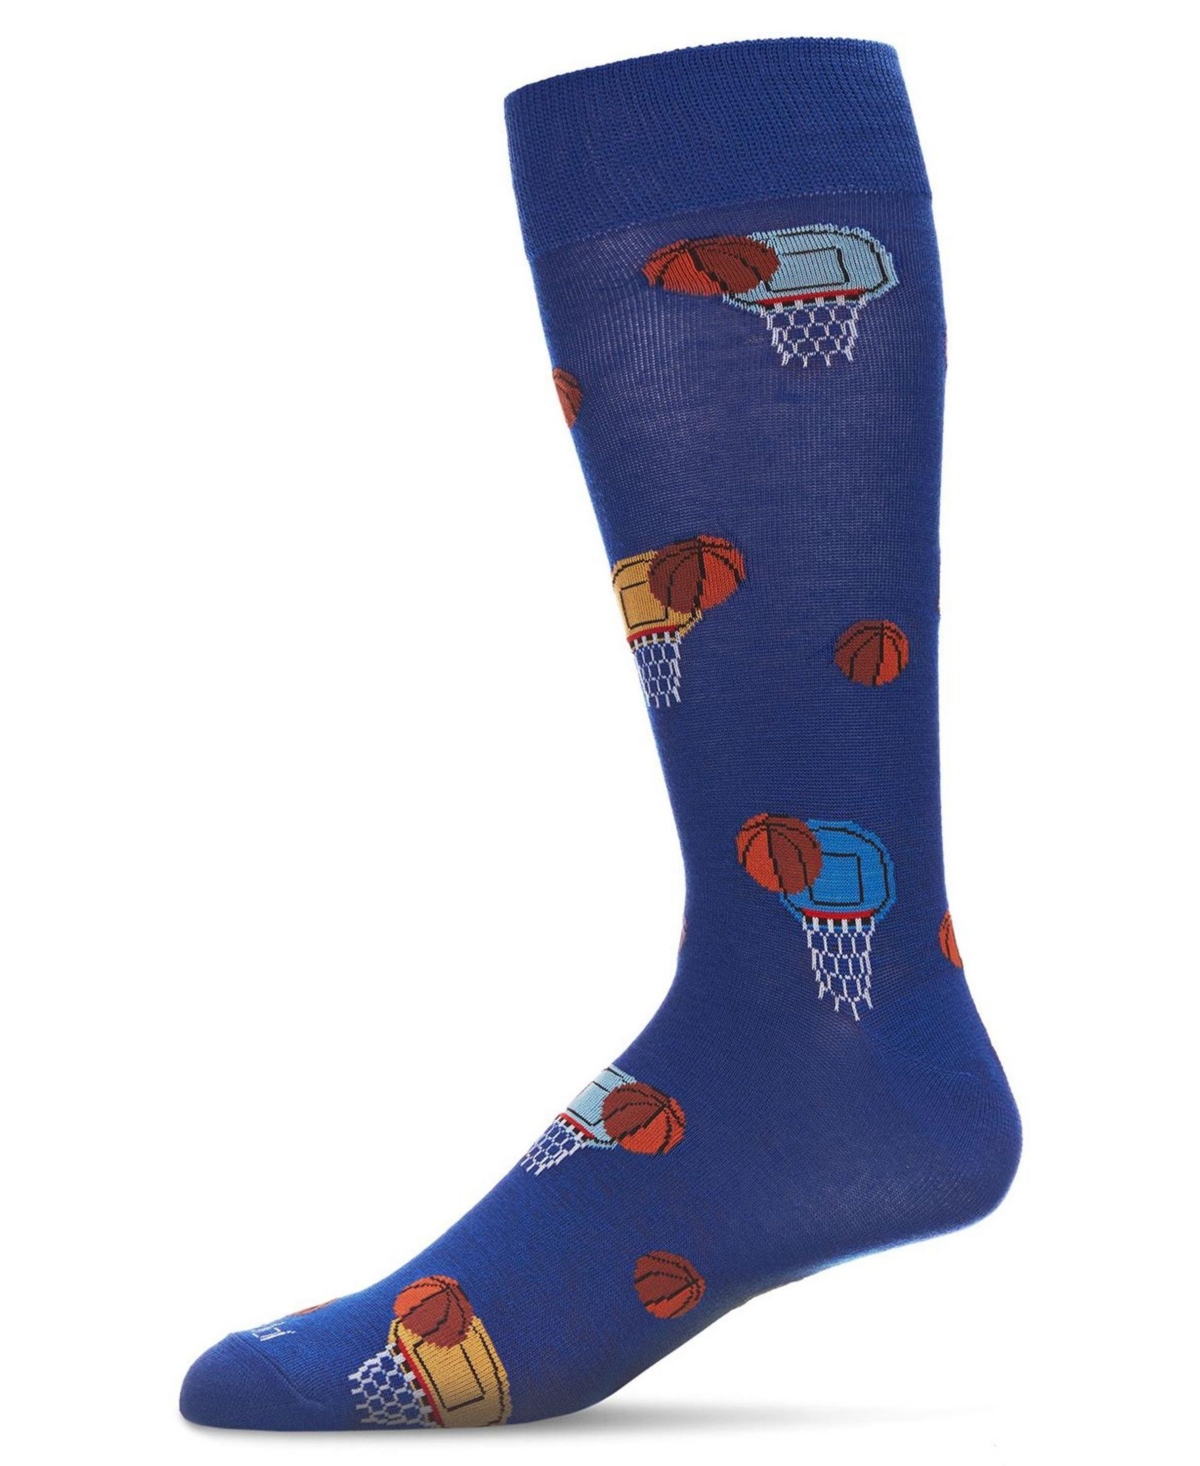 Men's Basketball Game Rayon from Bamboo Blend Novelty Crew Socks - Surf The Web